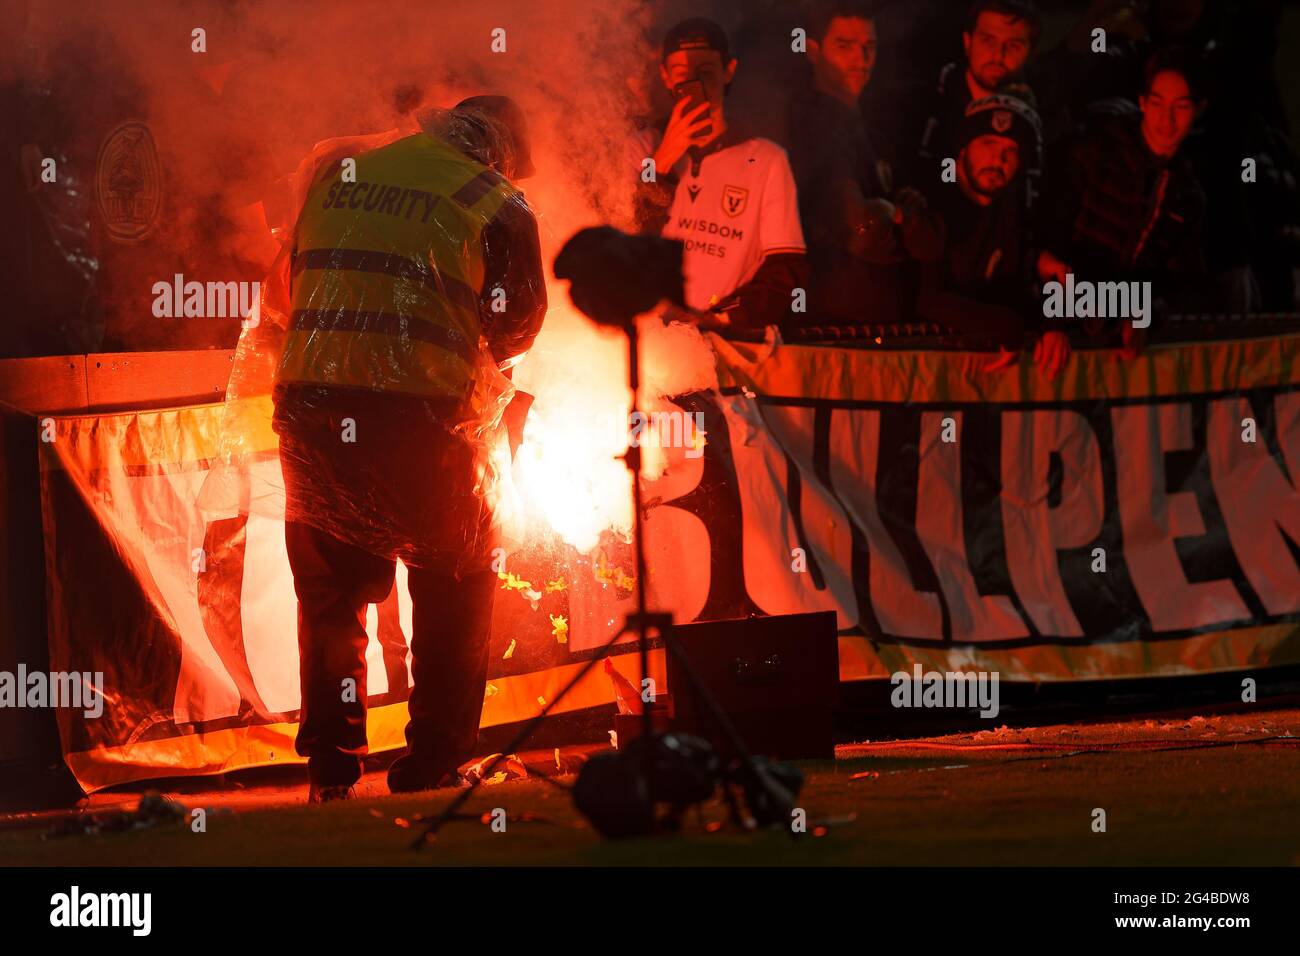 Sydney, Australia. 20th June, 2021. A security guard is attempting to put out the flare that was set off in the crowd during the A-League semi-final soccer match between Melbourne City and Macarthur on June 20, 2021 at Netstrata Jubilee Stadium in Sydney, Australia Credit: IOIO IMAGES/Alamy Live News Stock Photo